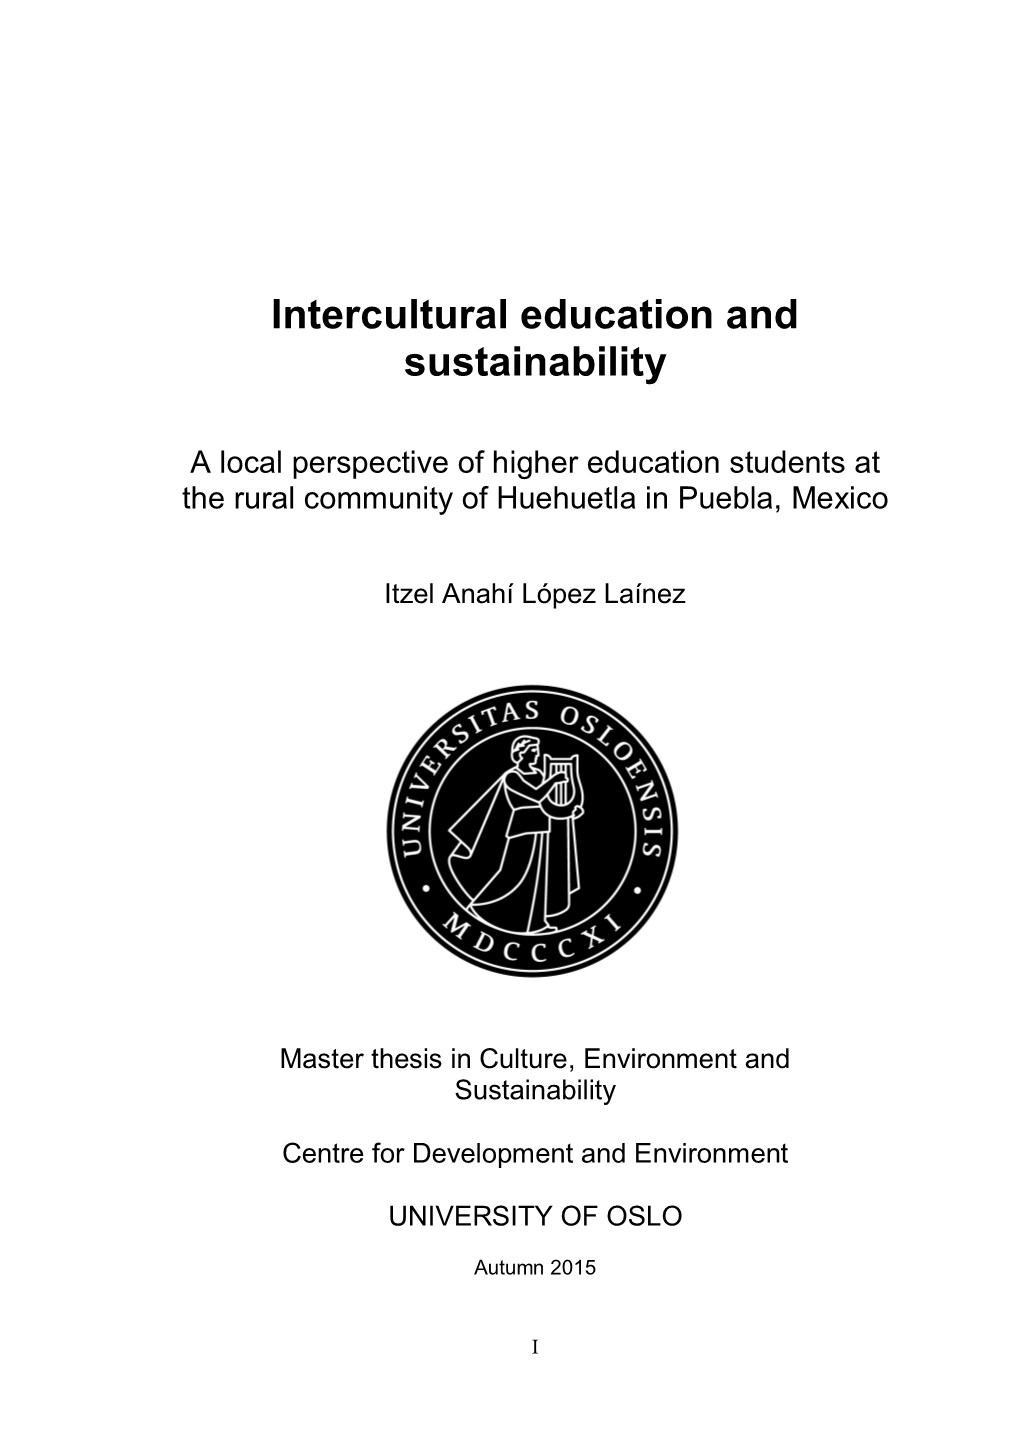 Intercultural Education and Sustainability